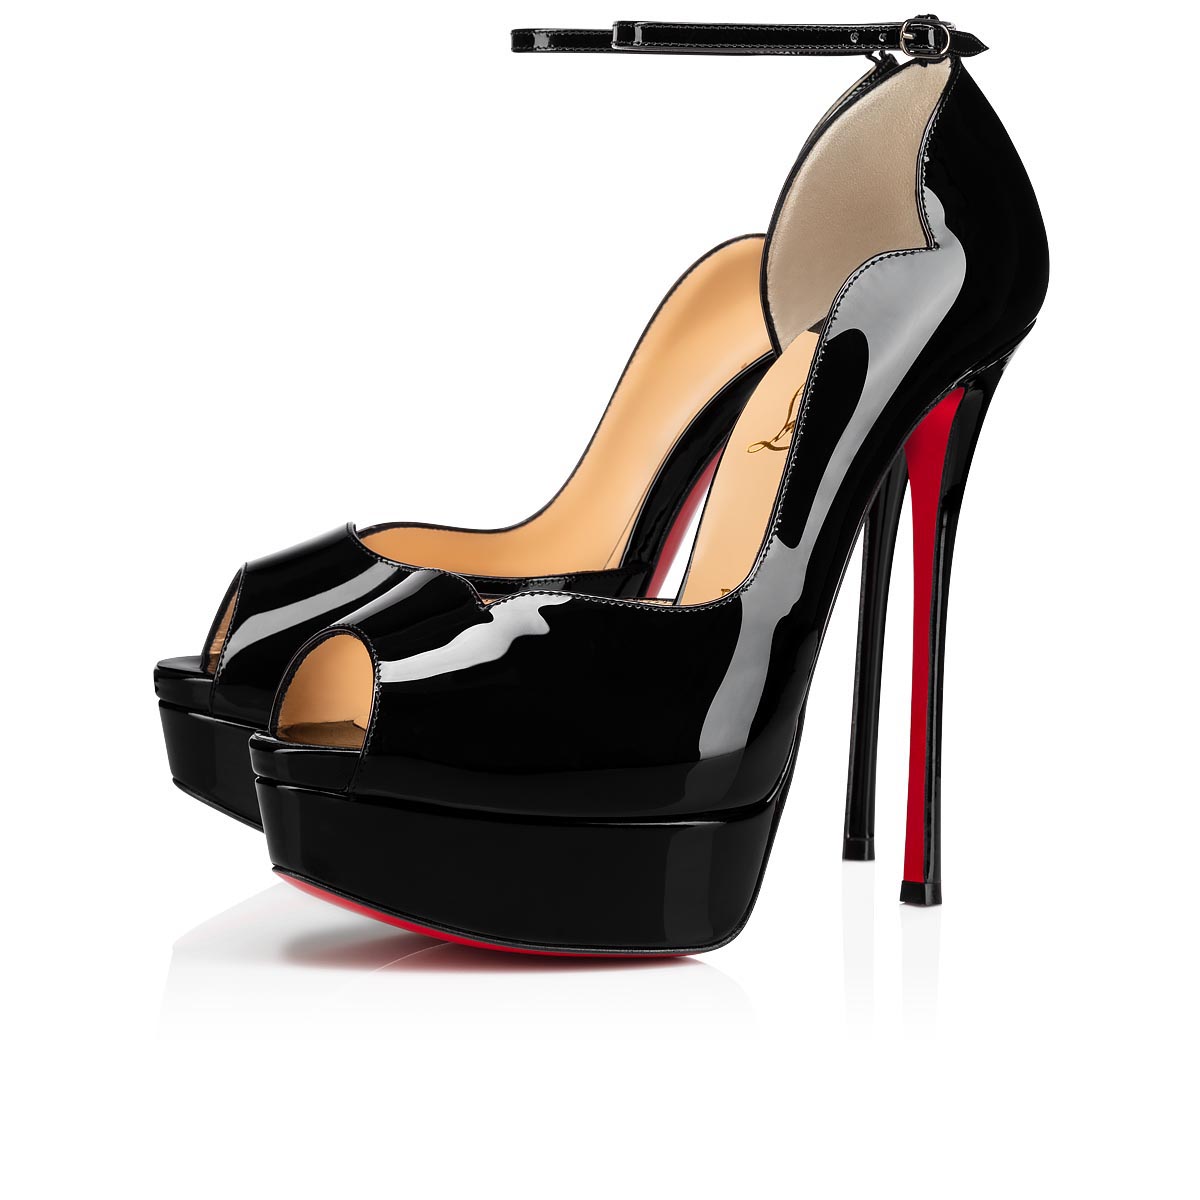 My Louboutin Fetish 150 Collection, any Ladies want to model them